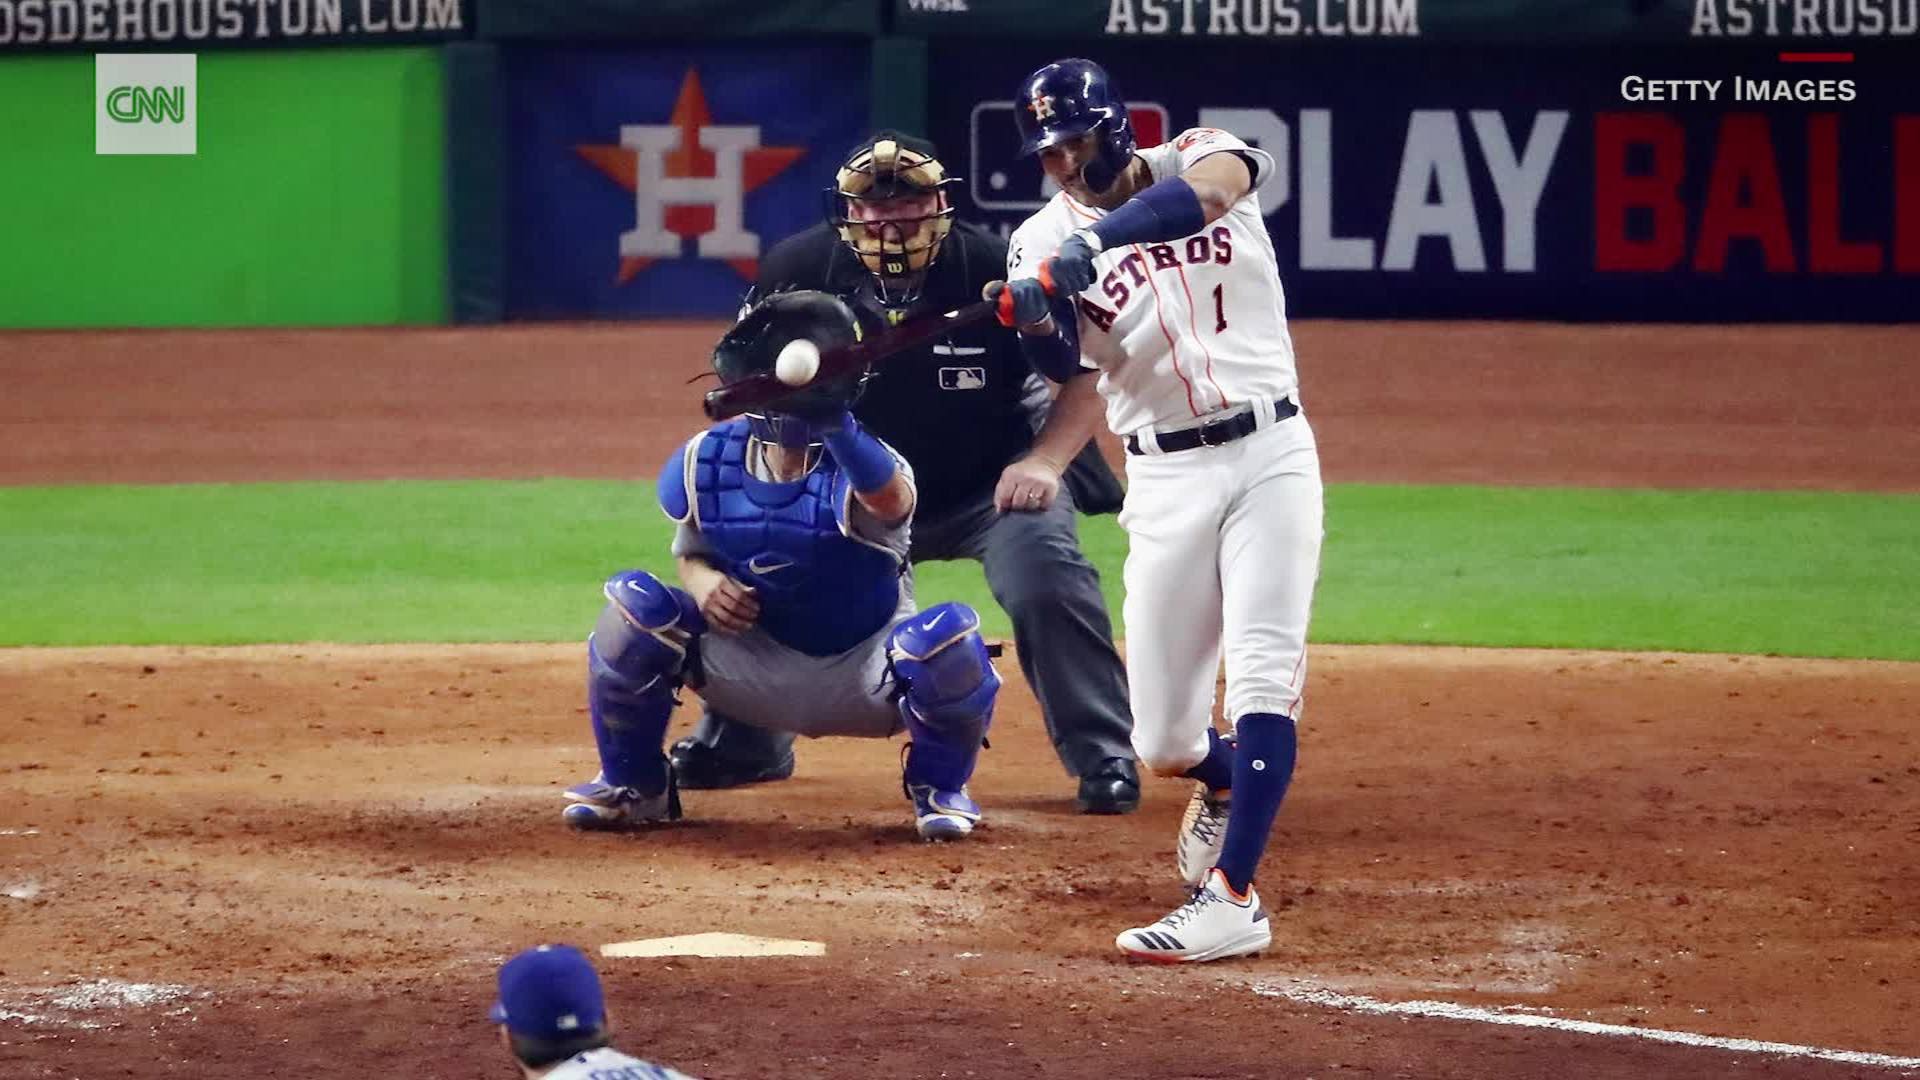 Houston Astros: Competitors hypocritical about sign-stealing